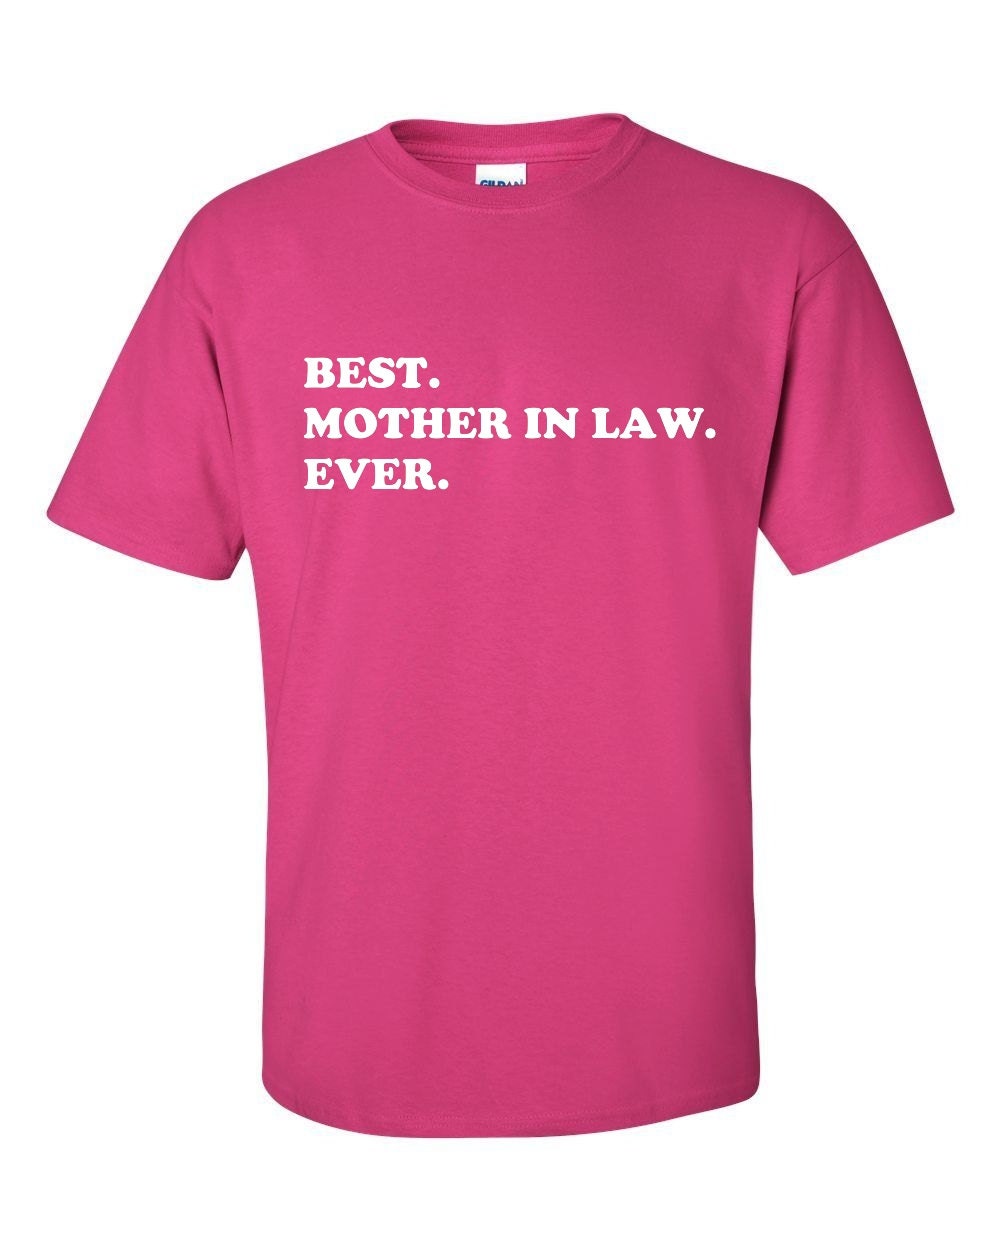 Best Mother in Law Ever Shirt Awesome Mother in by toastertees